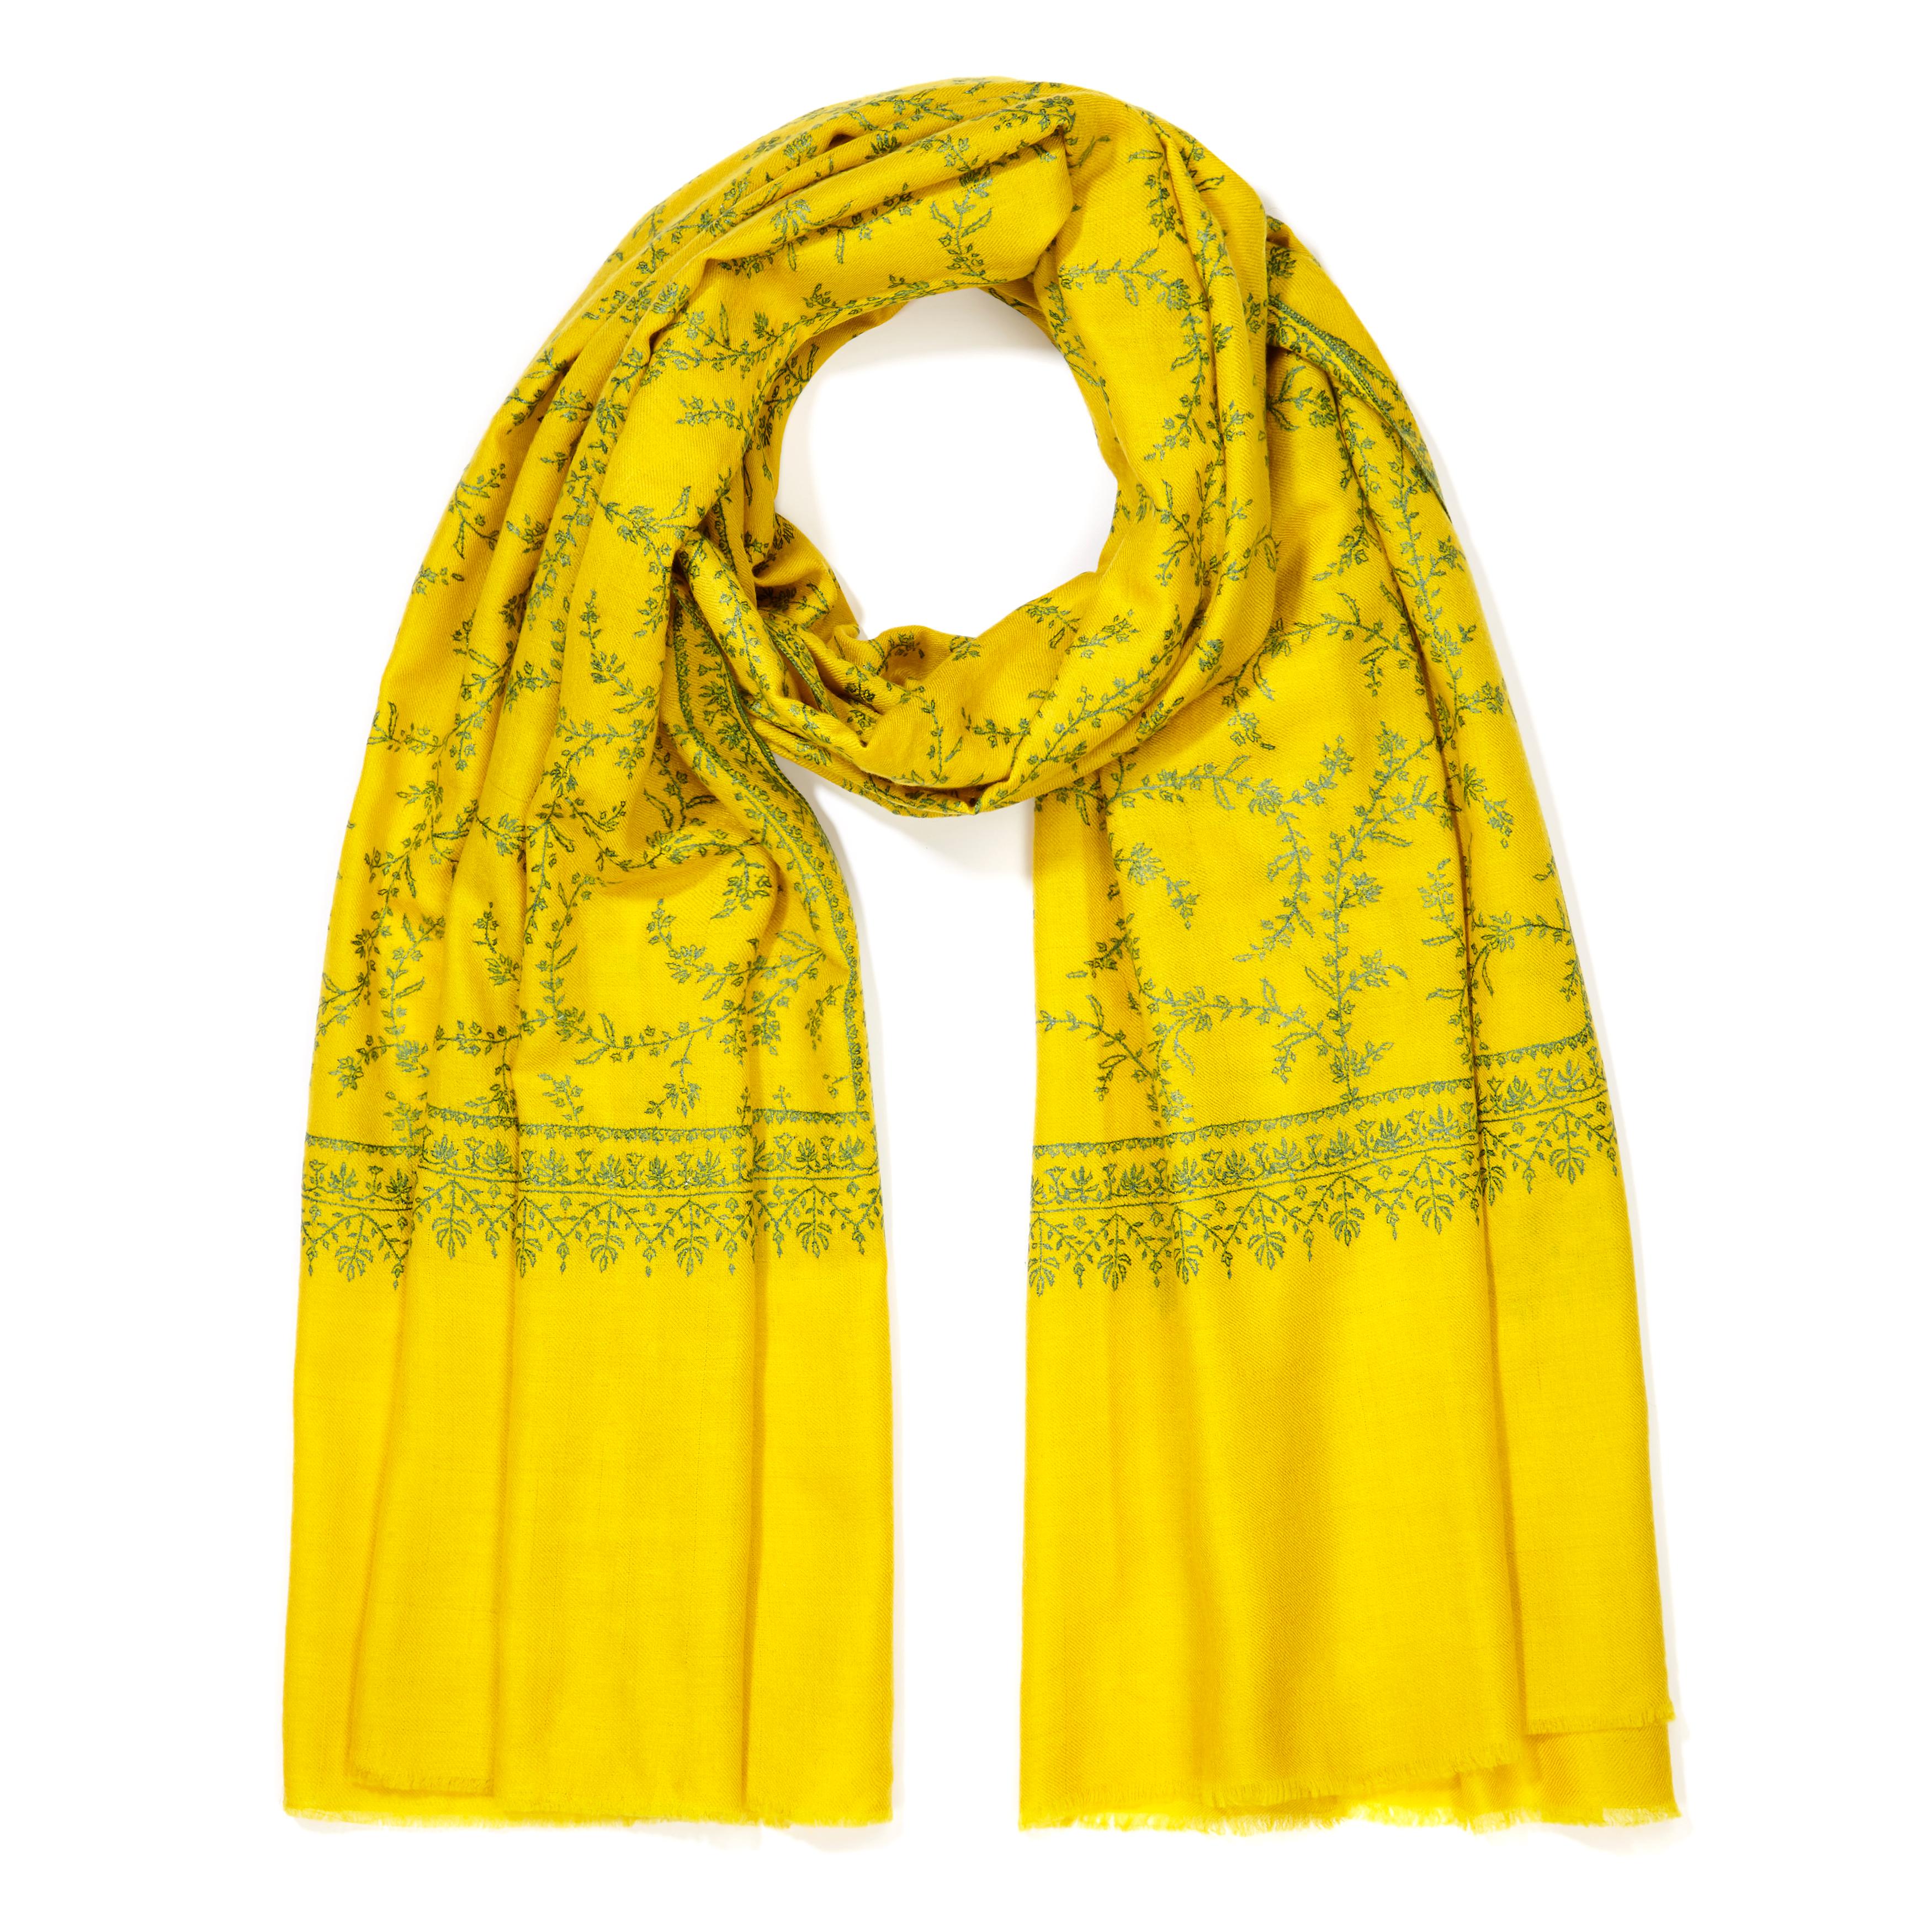 Women's or Men's Hand Embroidered 100% Cashmere Shawl in Yellow Made in Kashmir India - Brand New